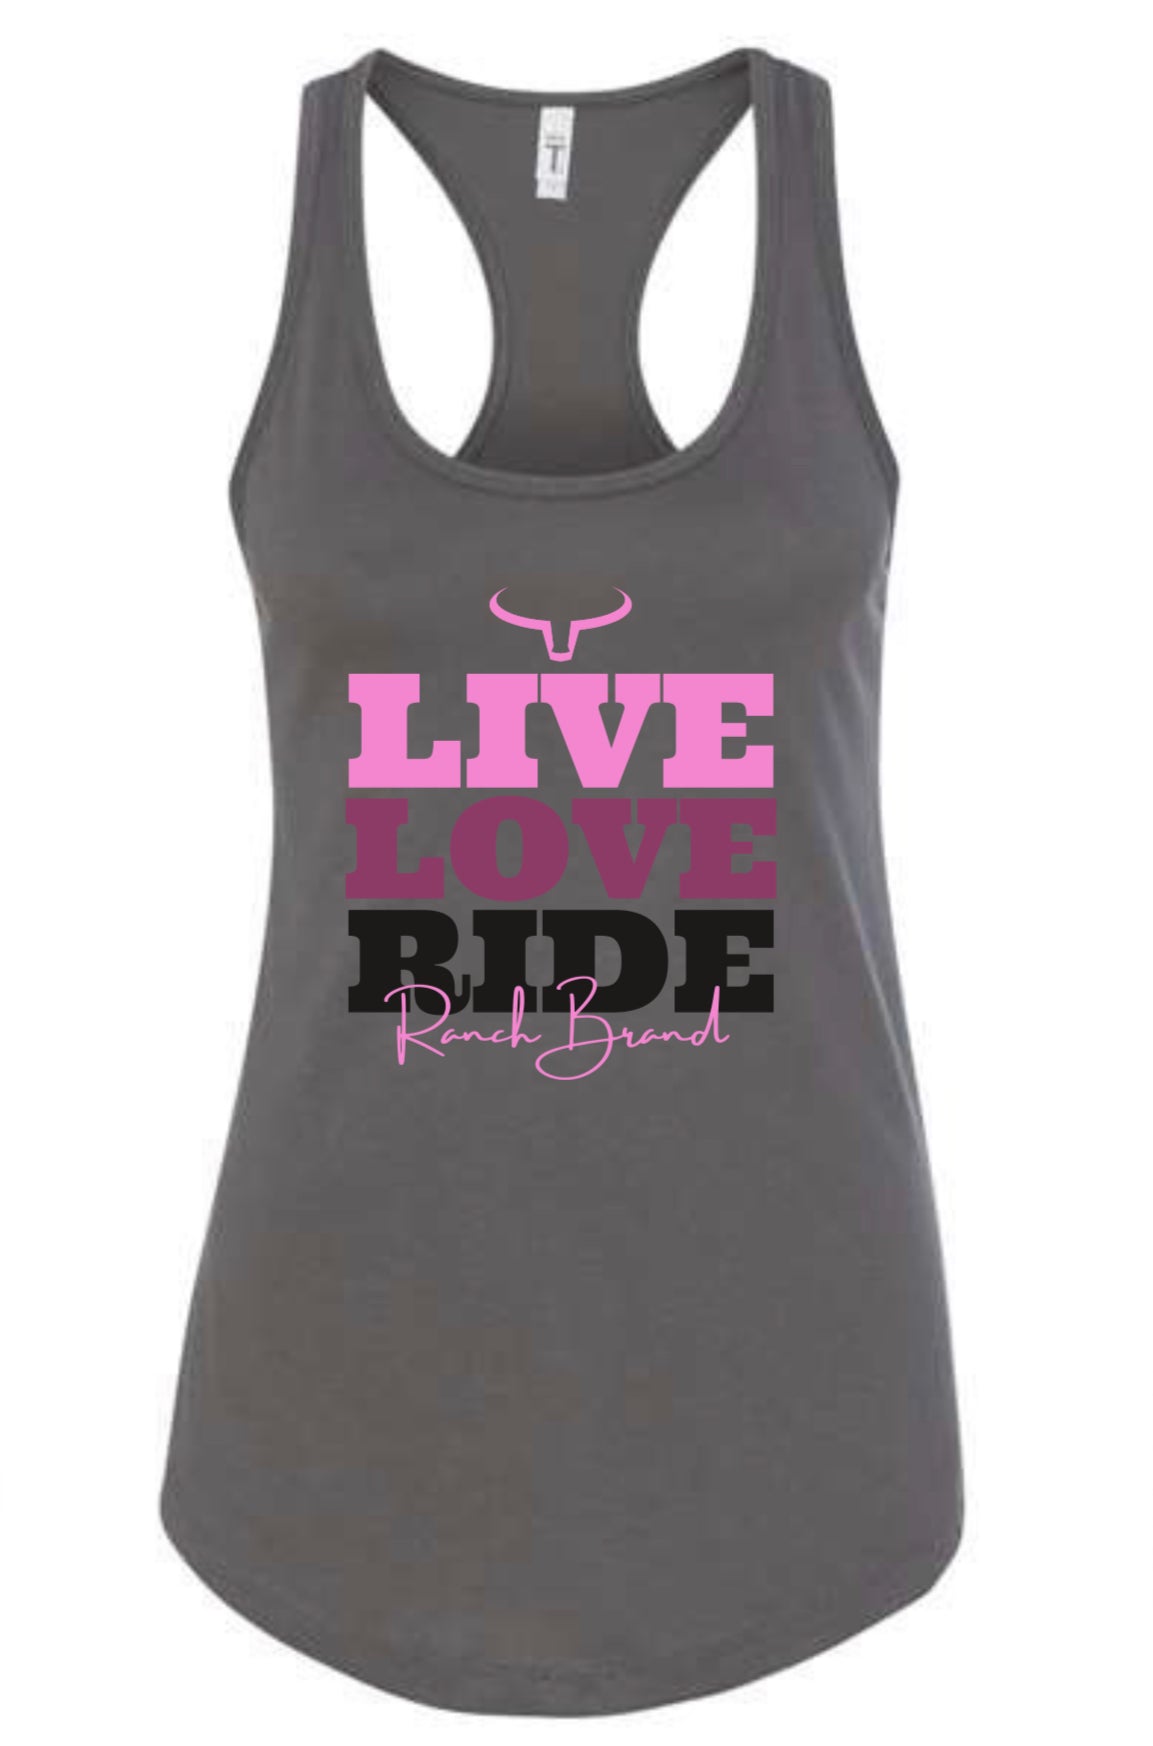 Ranch Brand | Camisole Ride Femme | Gris & Rose